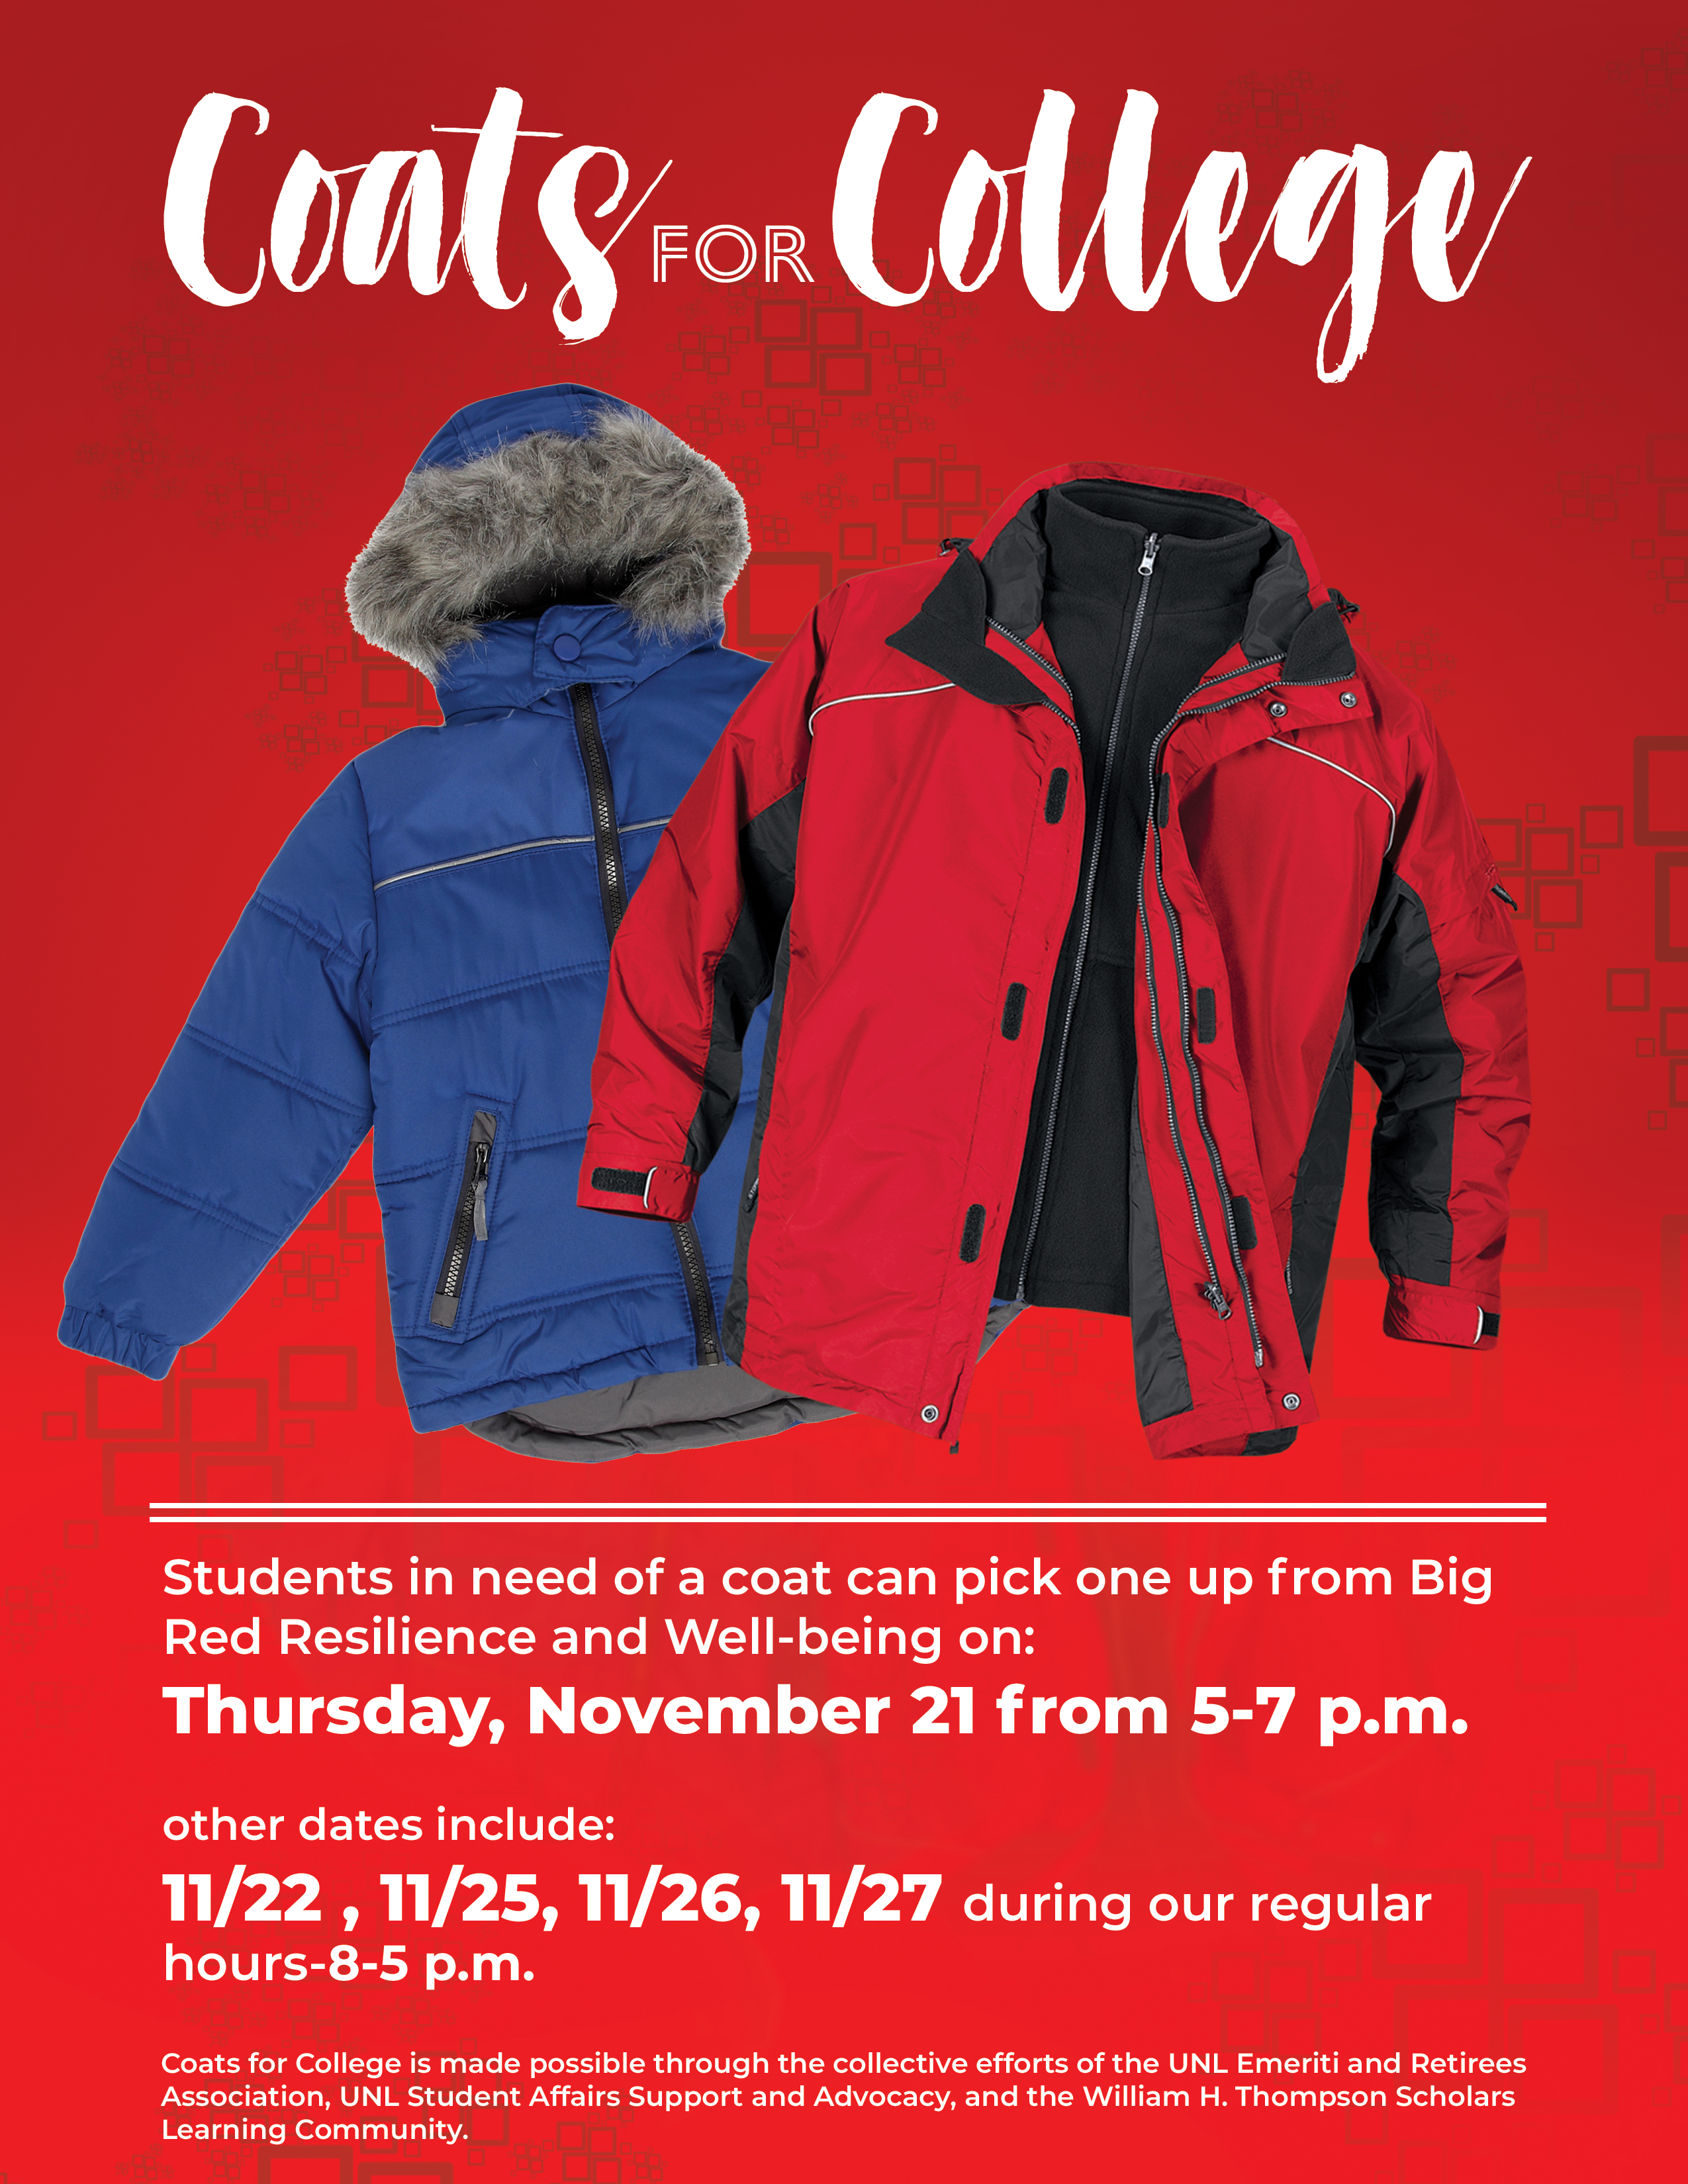 Students can pick up a coat and other winter wear on Thursday, November 21 at the Big Red Resilience & Well-being Open House between 5 p.m. and 7 p.m.